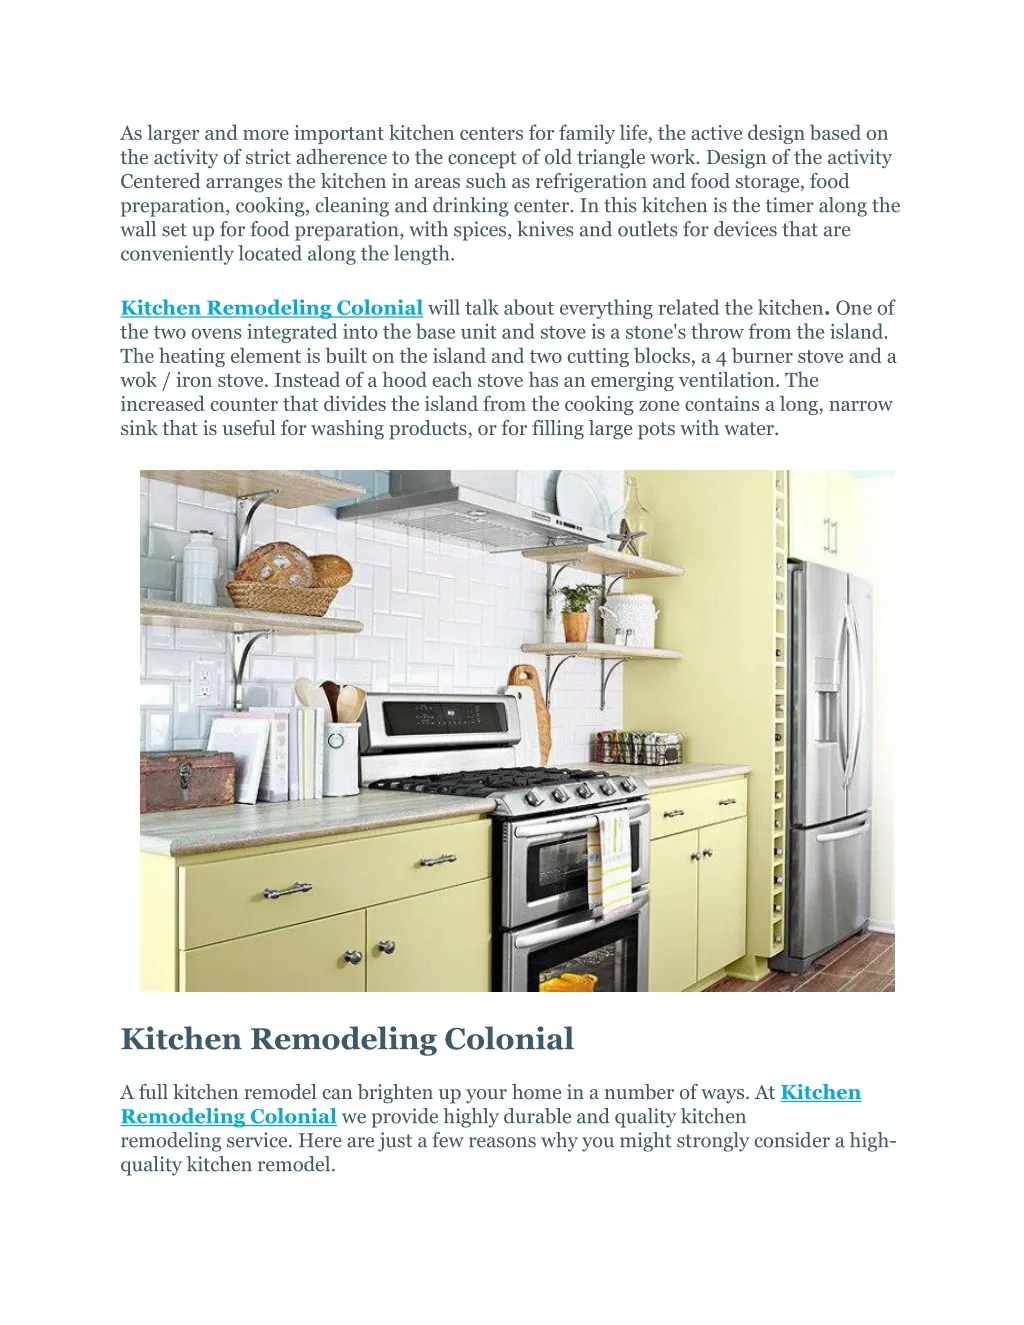 PPT - Kitchen Remodeling Colonial PowerPoint Presentation, free ...